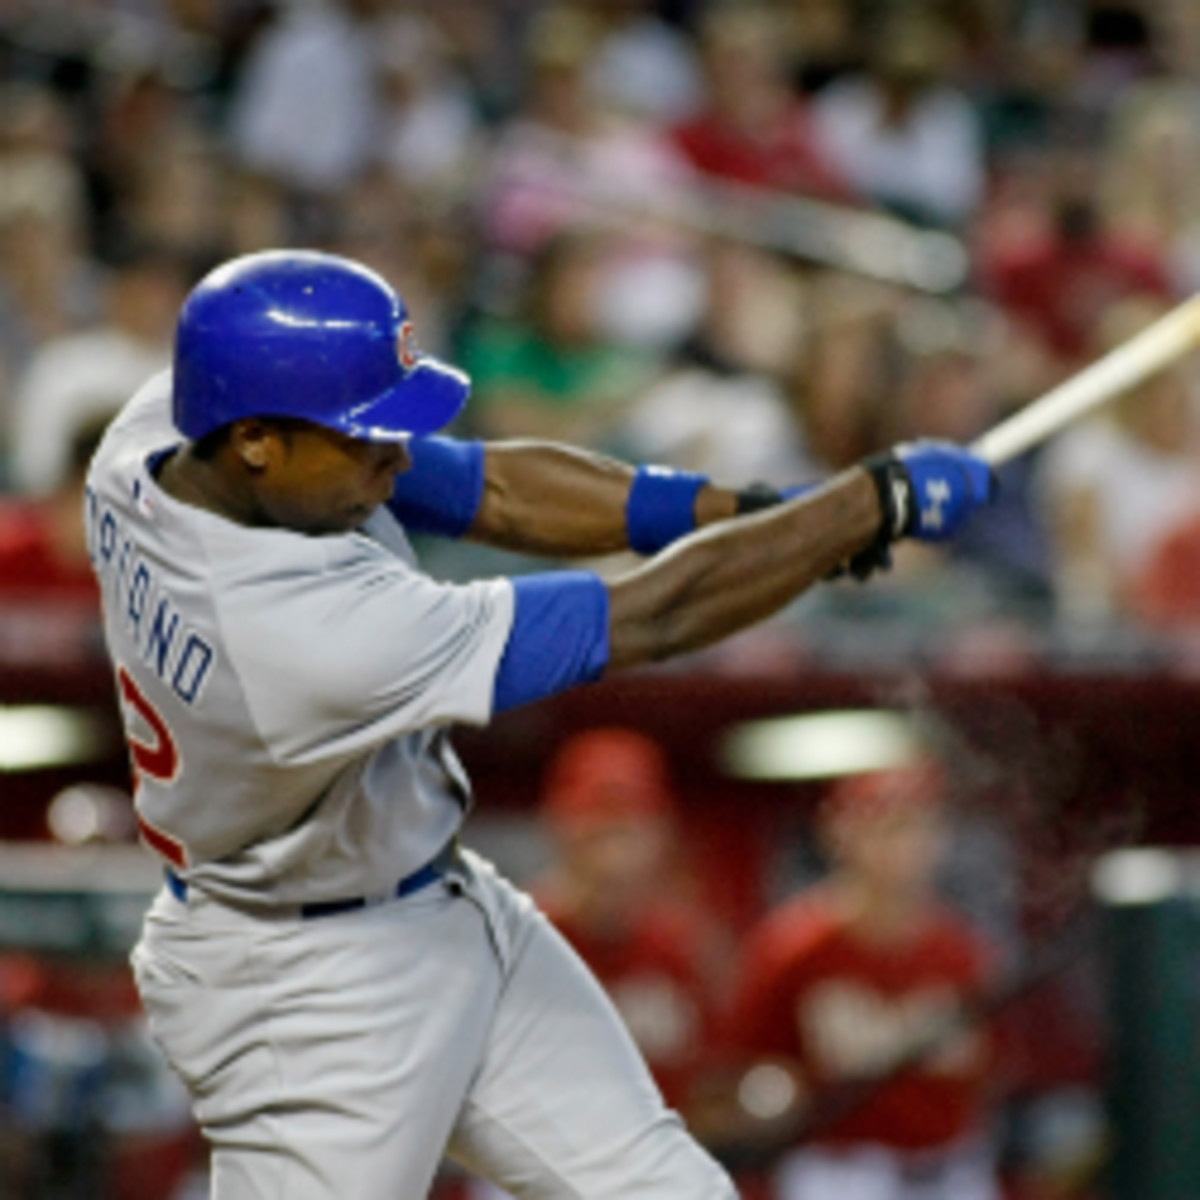 Alfonso Soriano said he would accept a trade to "six or seven" teams. (Ralph Freso/Getty Images)